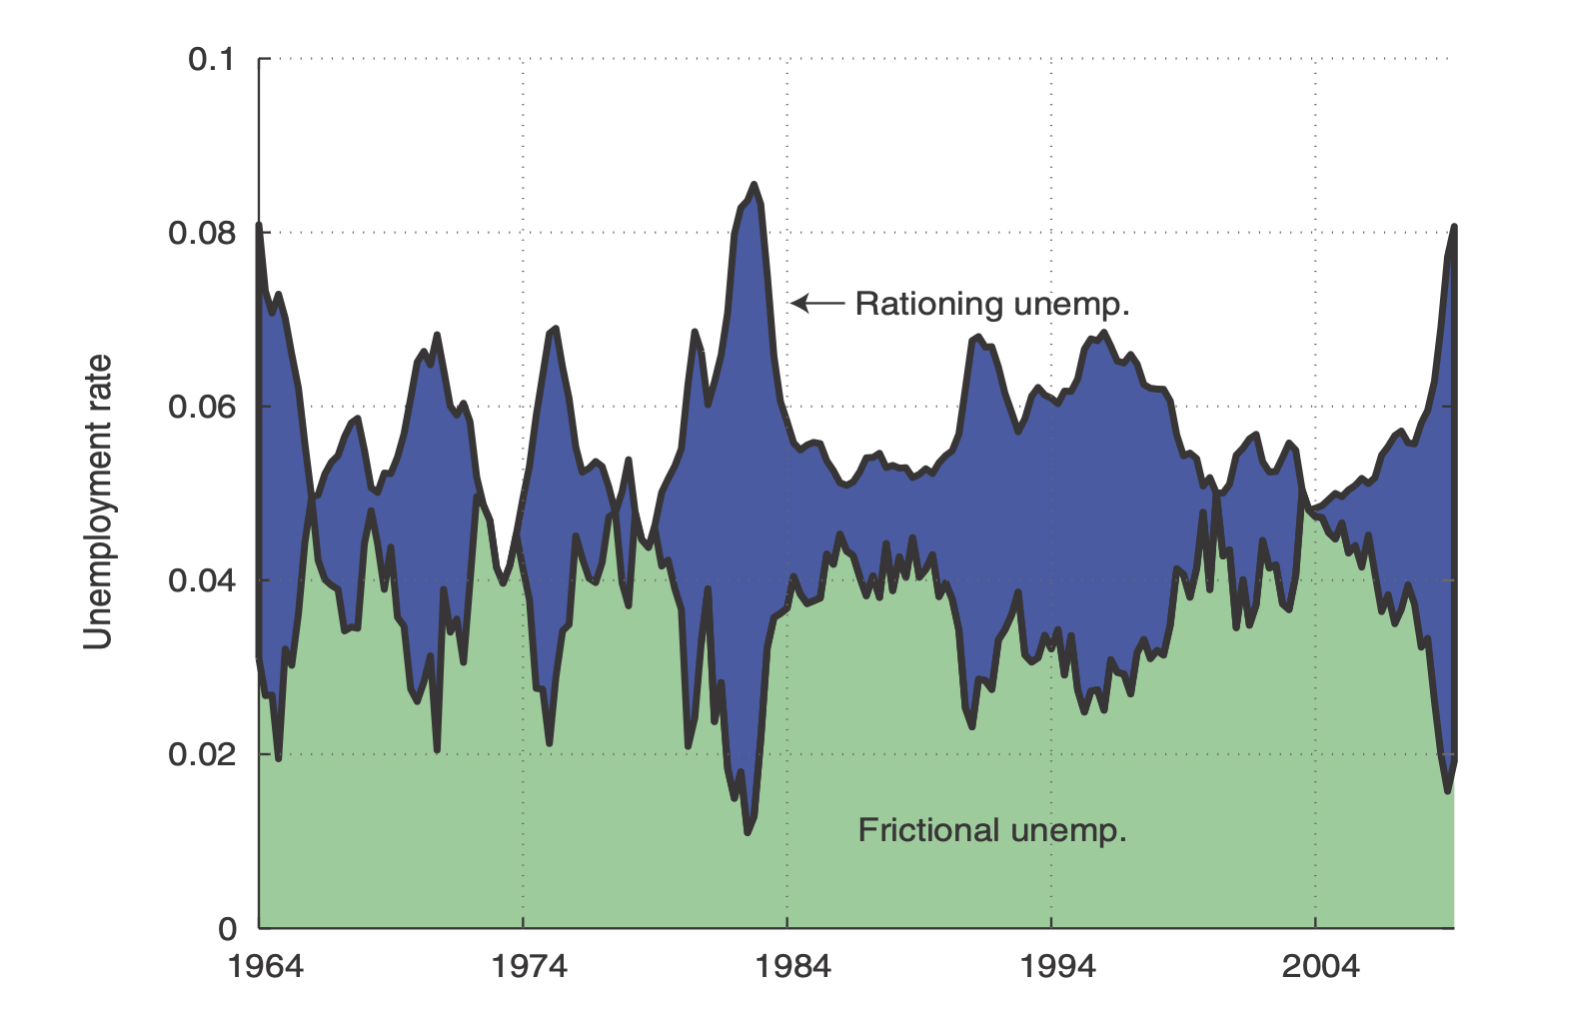 Rationing and frictional unemployment in the United States, 1964–2009